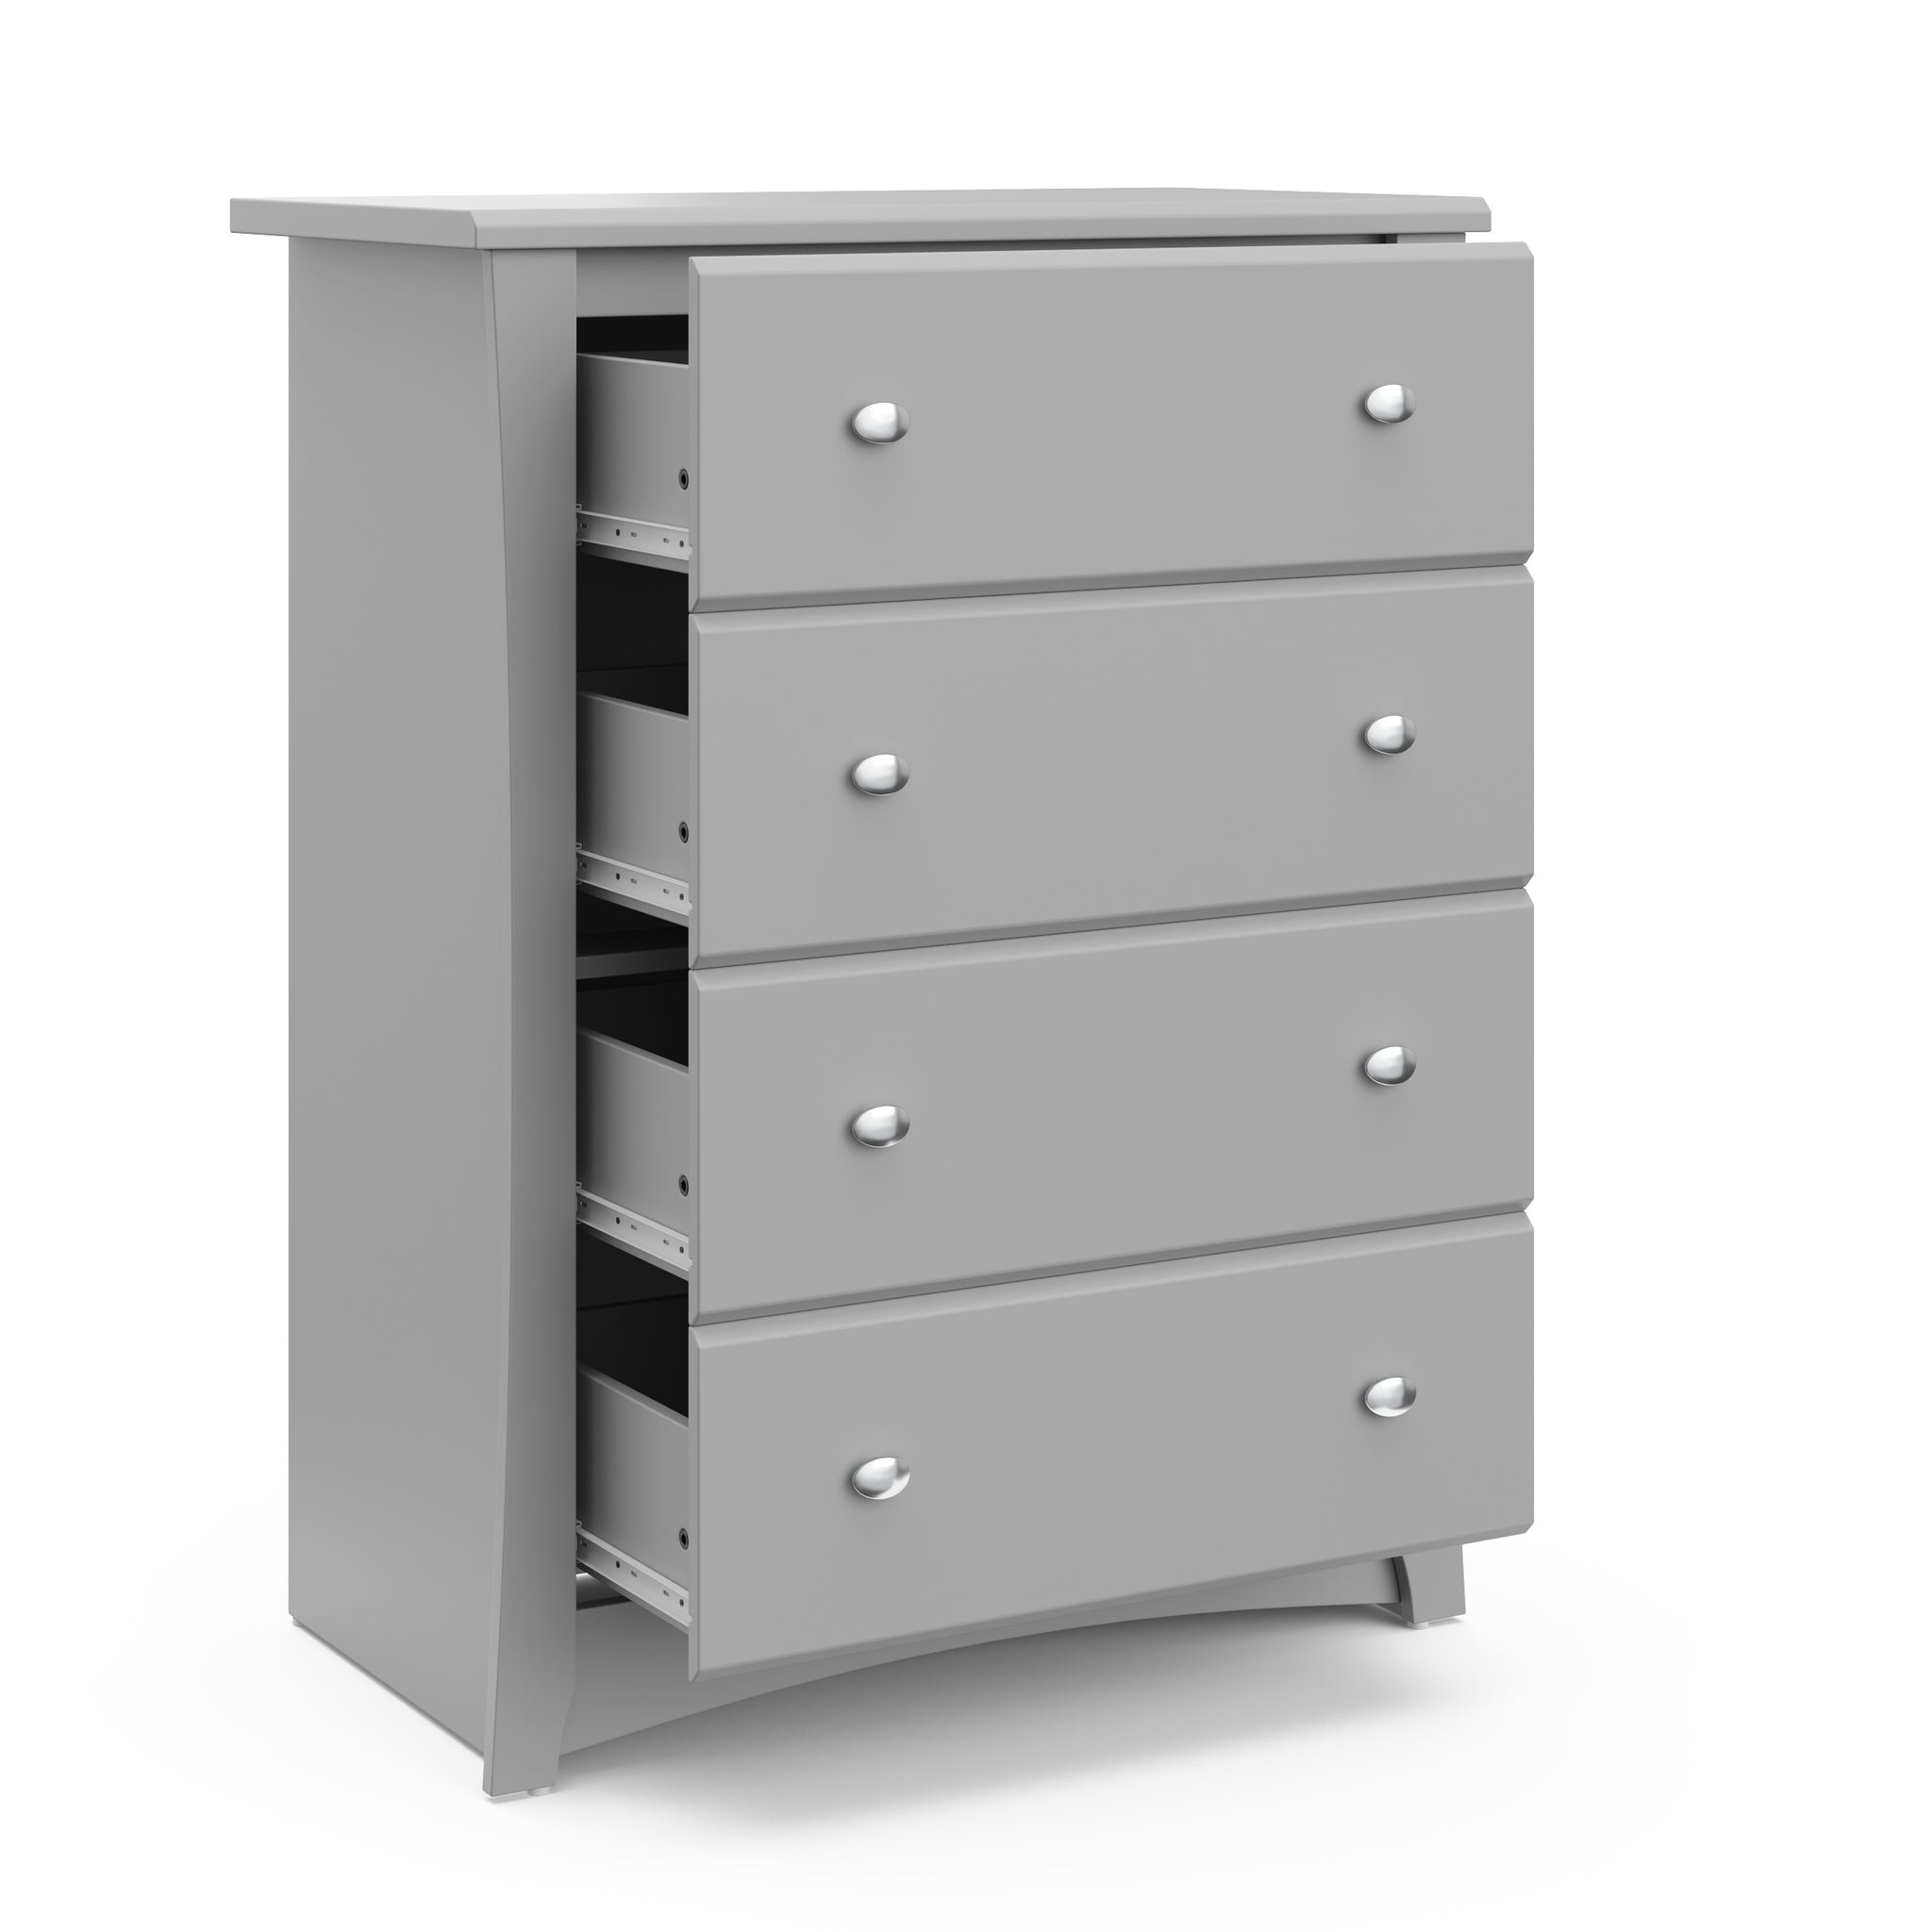 Pebble gray 4 drawer chest with 4 open drawers